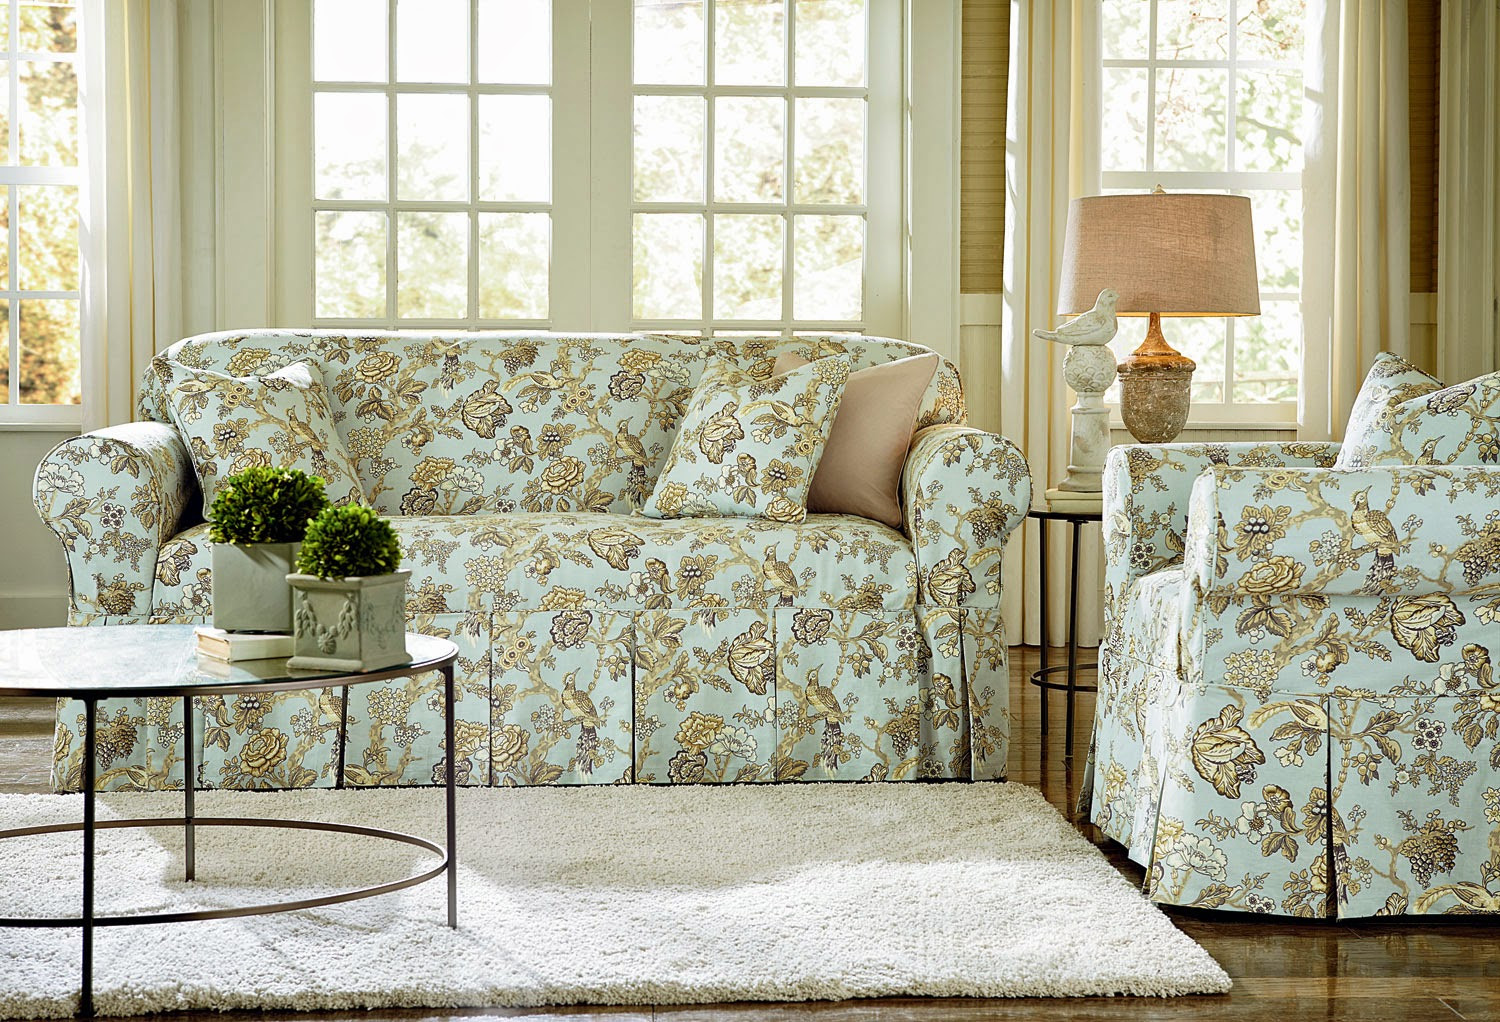 Living Room Chair Slipcovers
 Sure Fit Slipcovers Wallpaper and Slipcovers Back in the